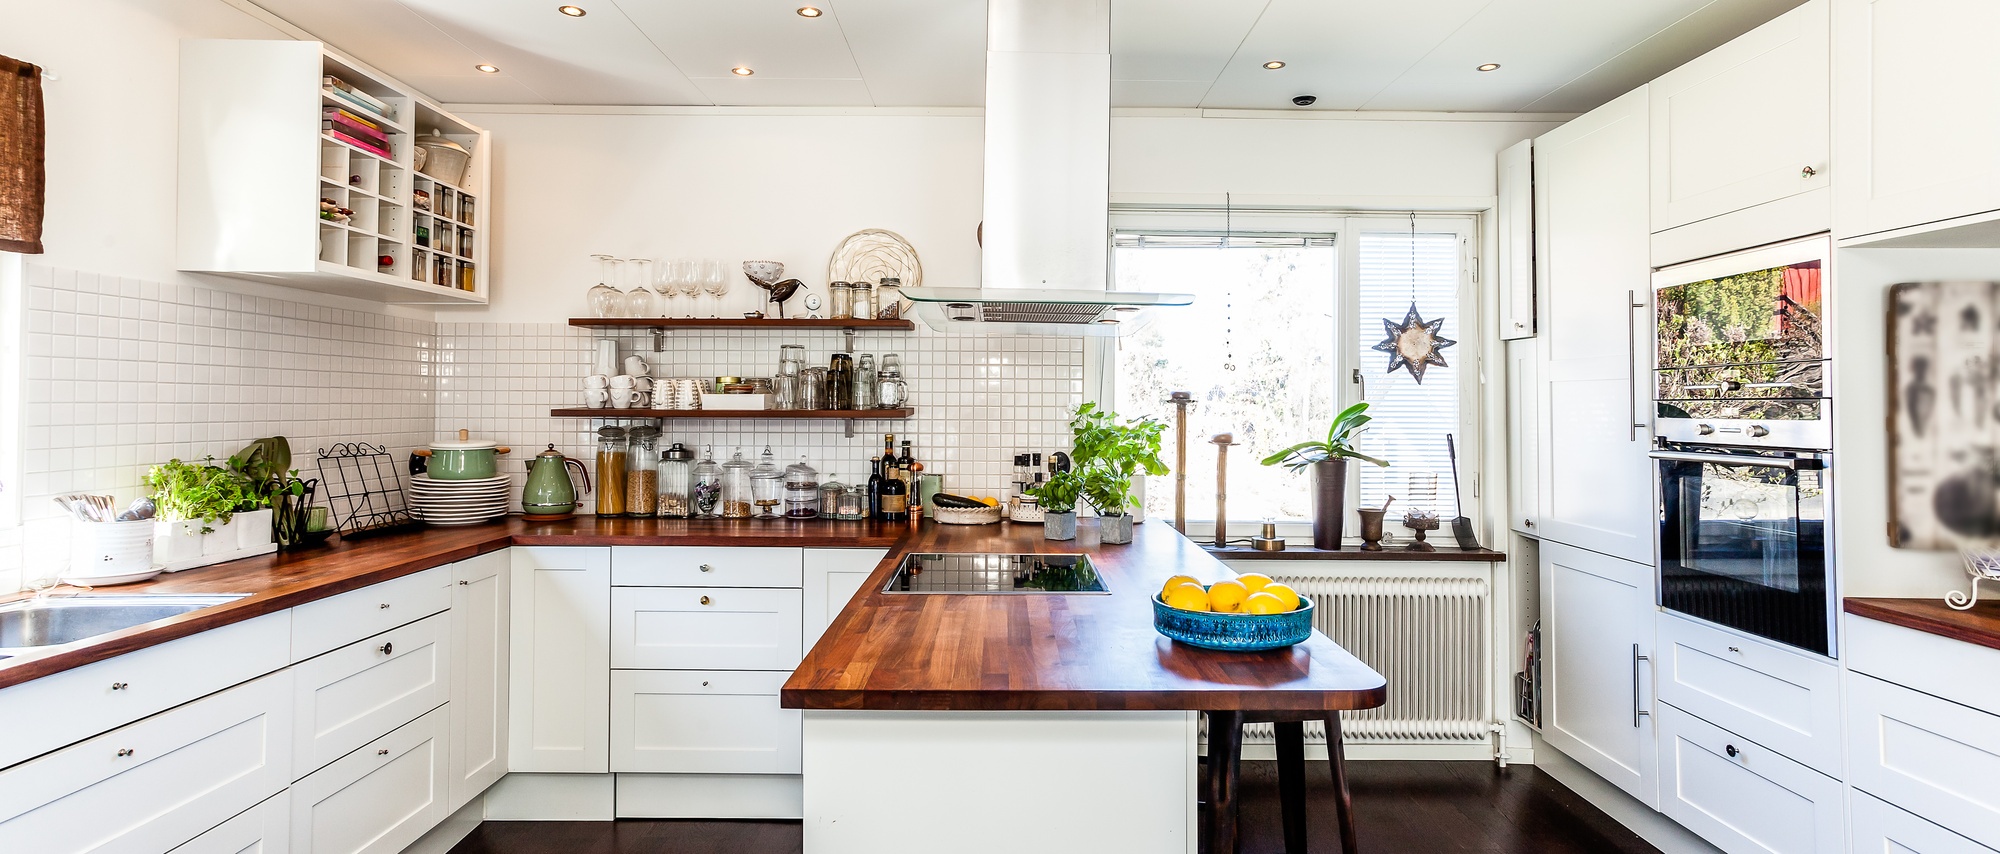 12 Low Maintenance Countertops That Would Look Amazing In Your